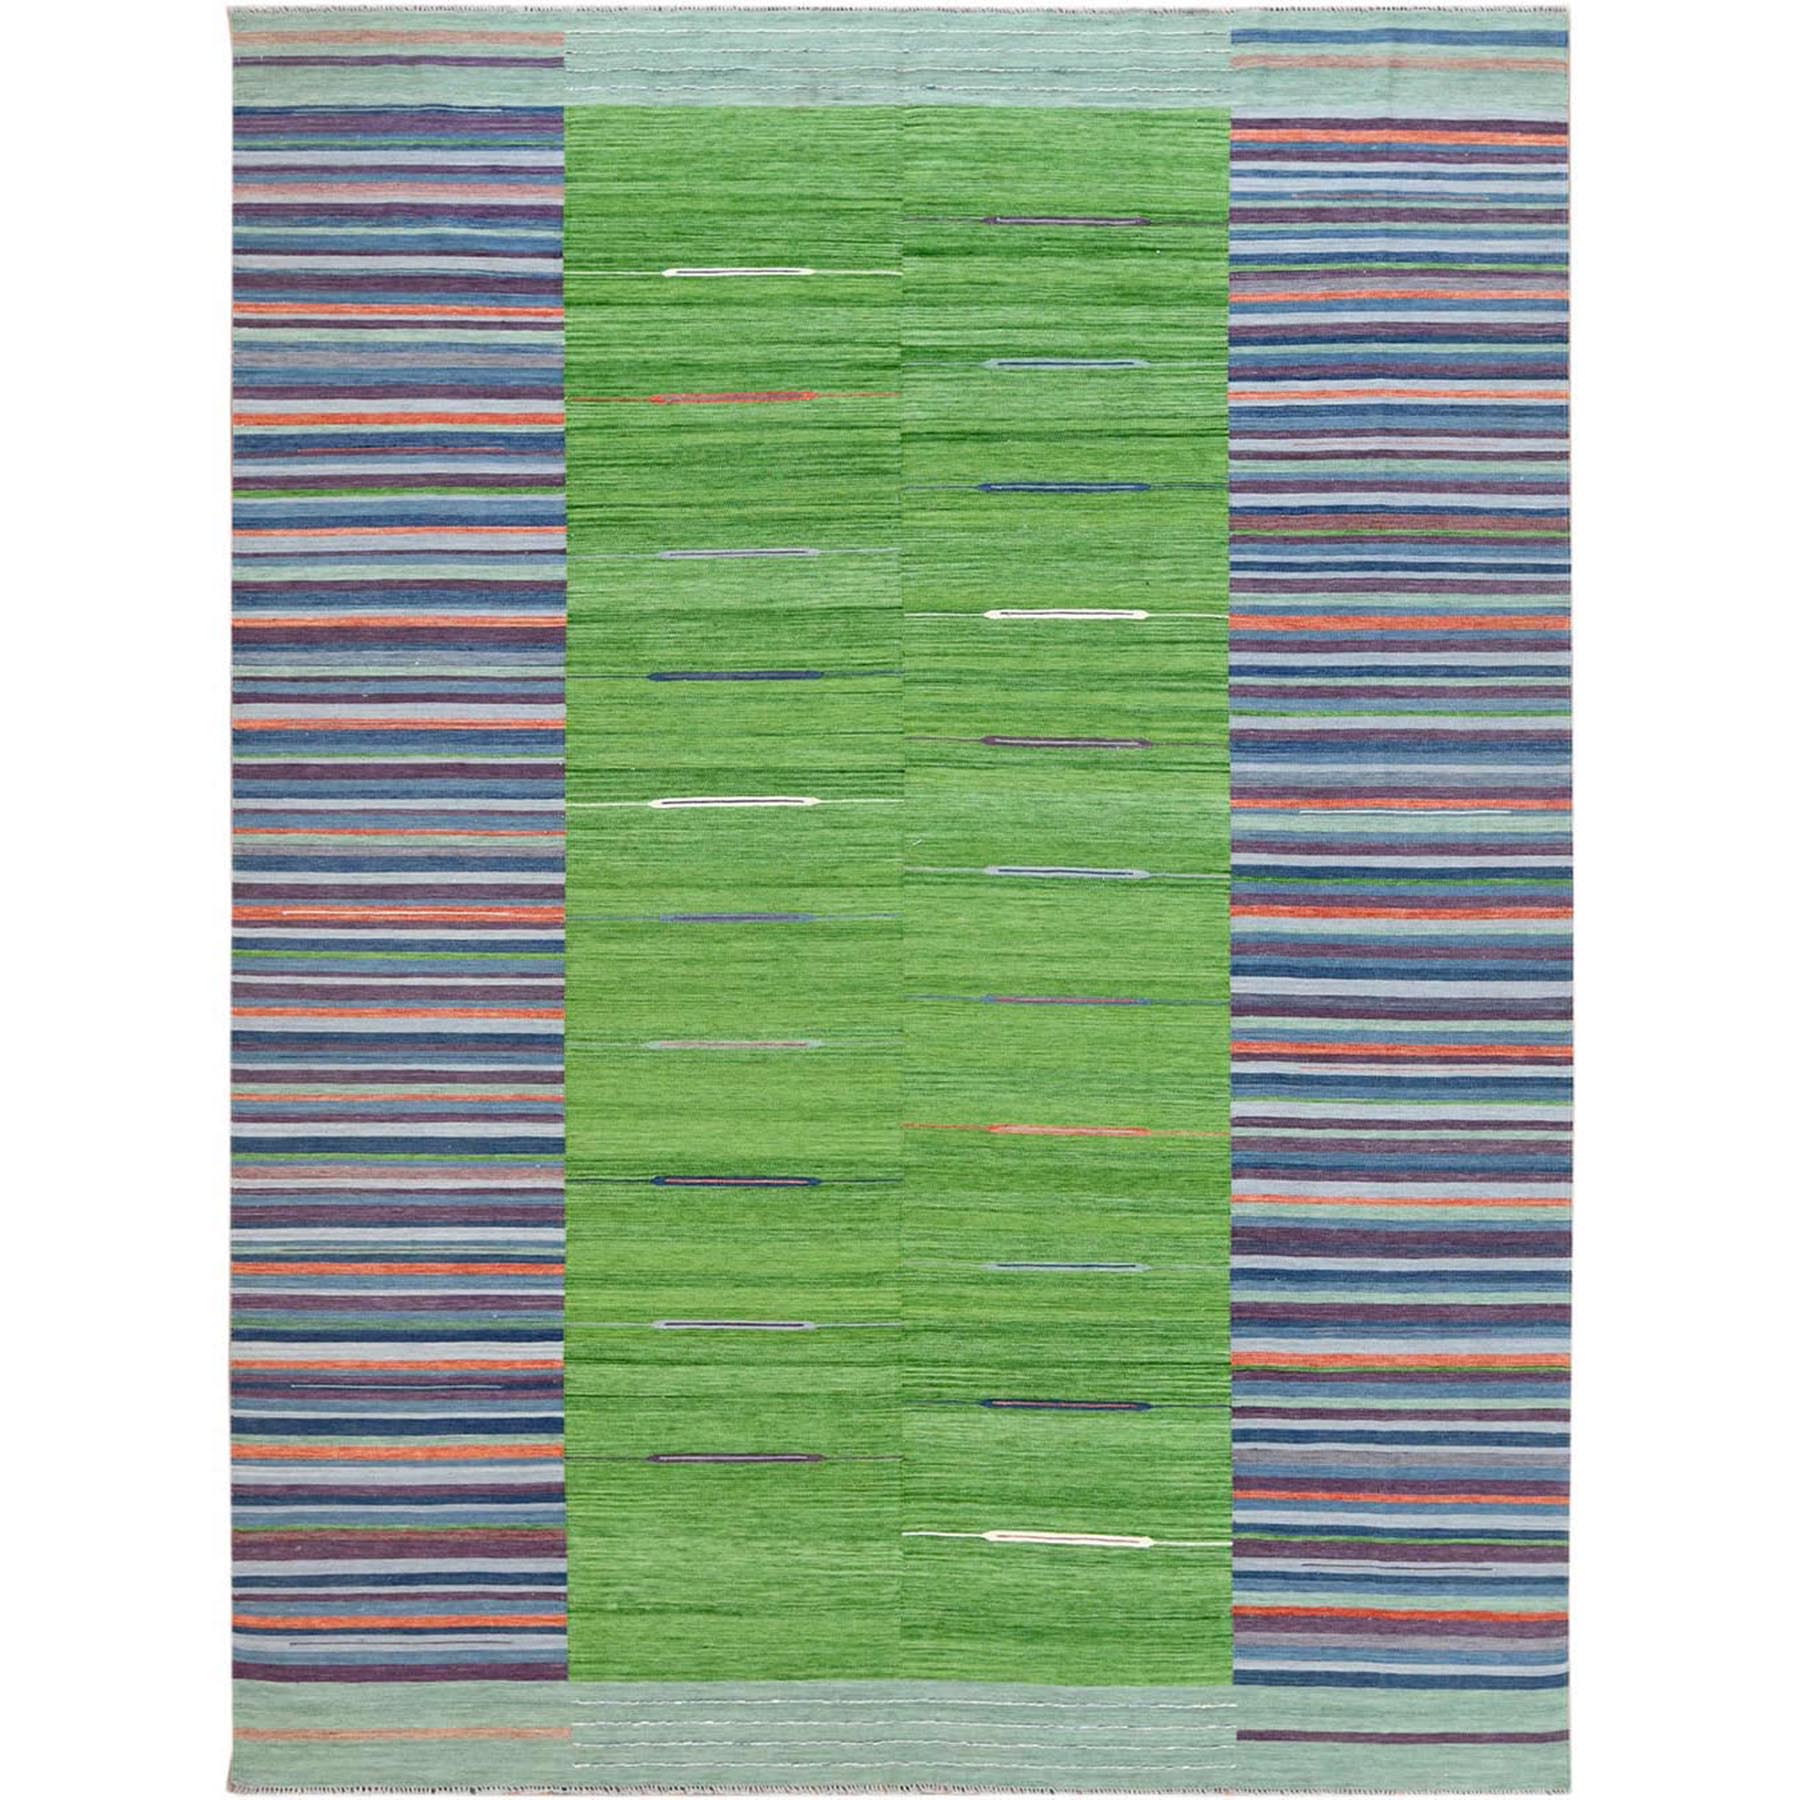 Modern & Contemporary Wool Hand-Woven Area Rug 9'3